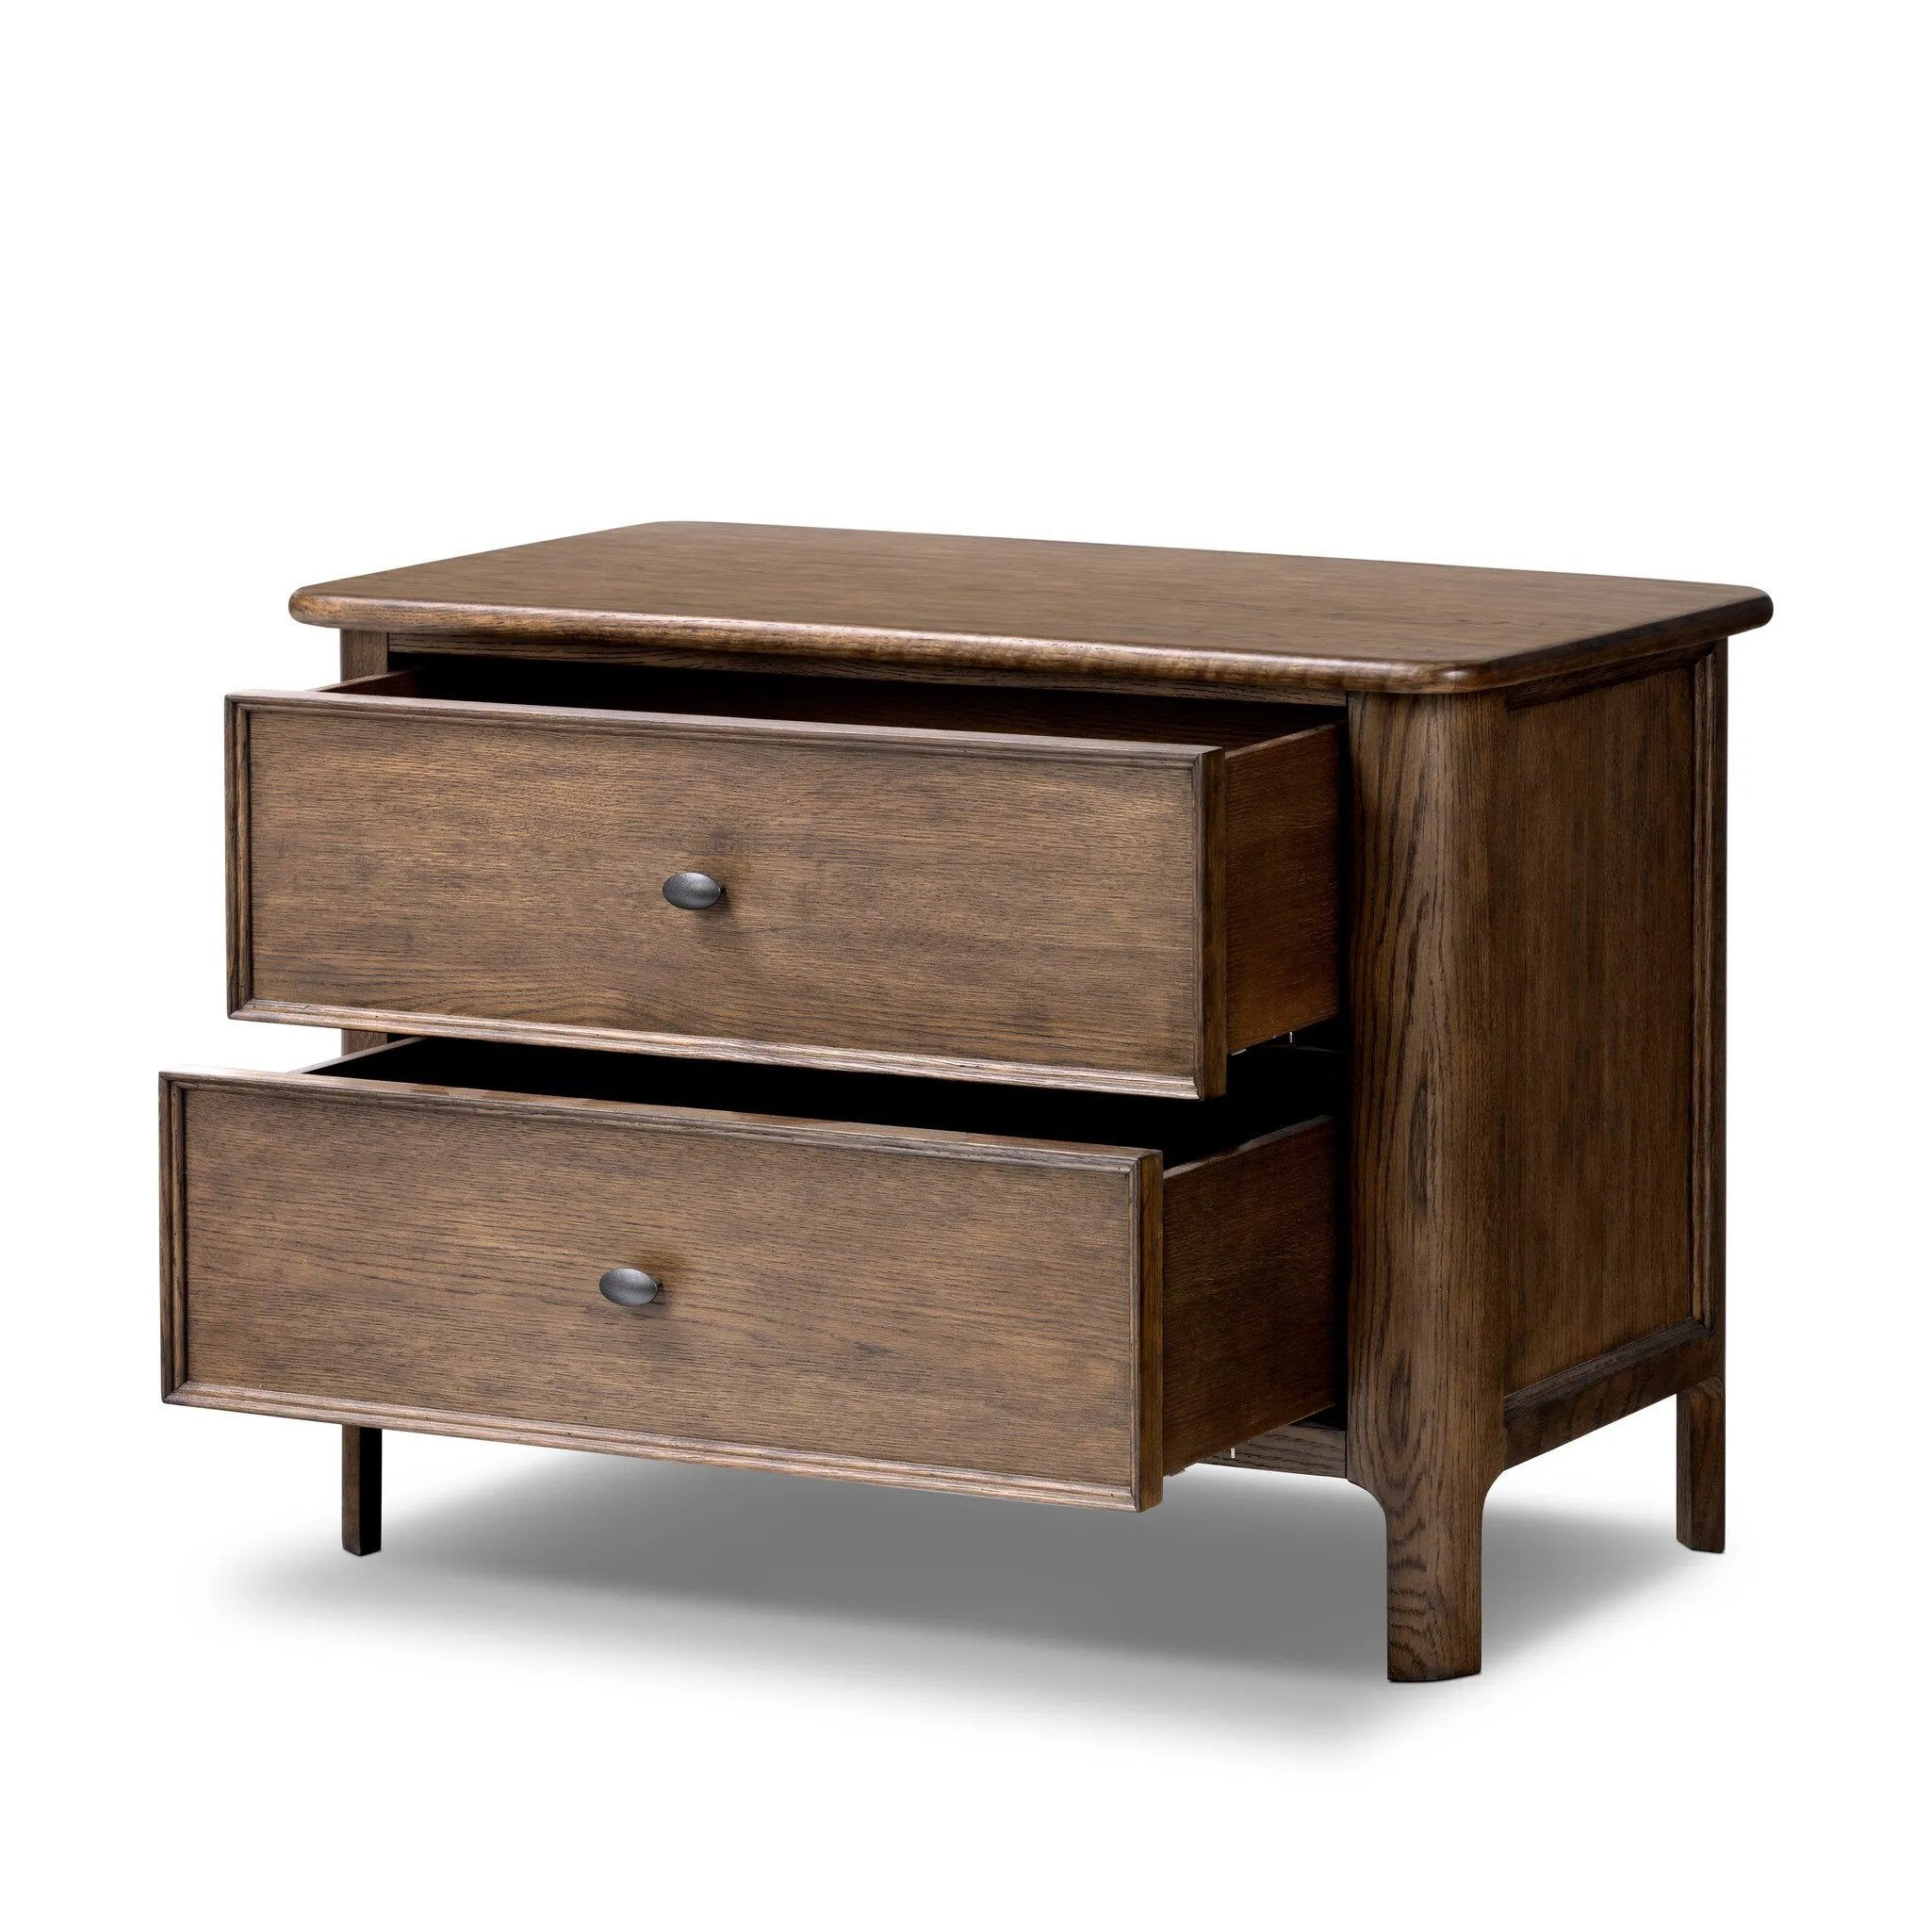 Like an heirloom nightstand with two roomy drawers, this aged oak design has room for it all. Detailed with an overhang surface, carved edges top to bottom, angled legs and oval drawer pulls finished in dark gunmetal.Collection: Bolto Amethyst Home provides interior design, new home construction design consulting, vintage area rugs, and lighting in the Park City metro area.